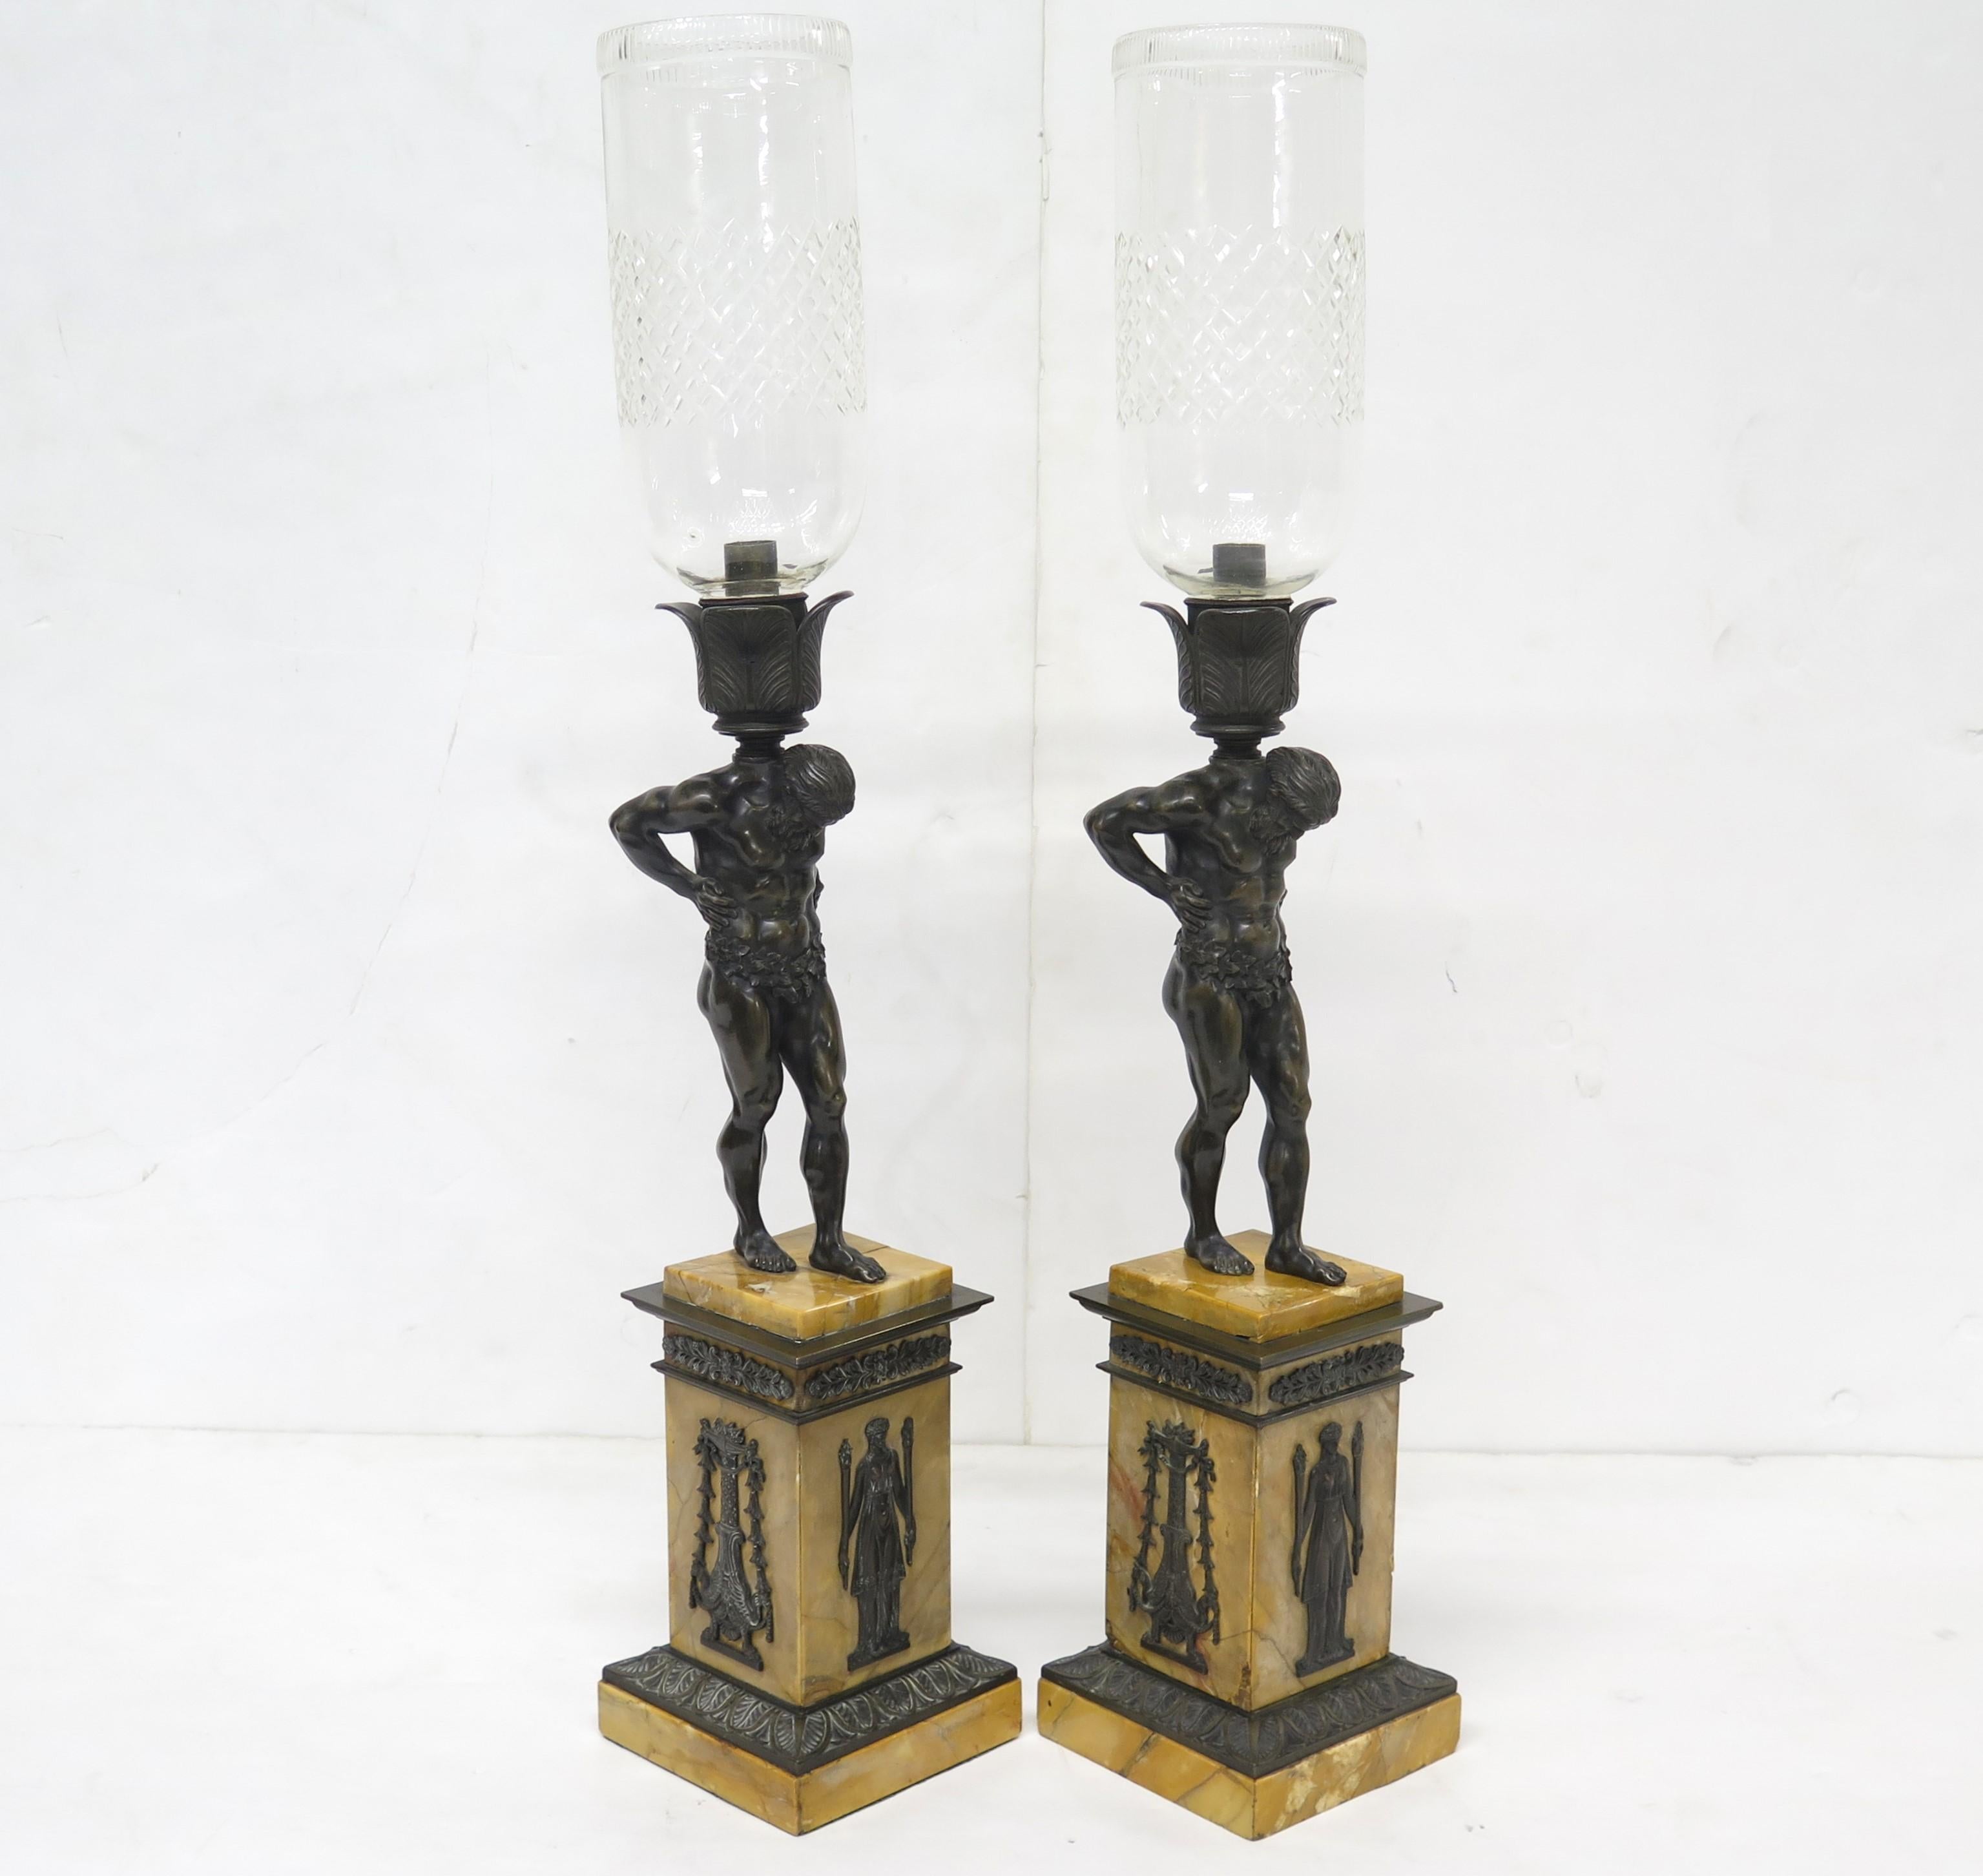 Pair of French restoration period candlesticks of patinated bronze and gilt bronze with figures of Atlas supporting a flower bobeche and etched glass hurricane. The bases are in sienna yellow marble. France. Early 19th Century.